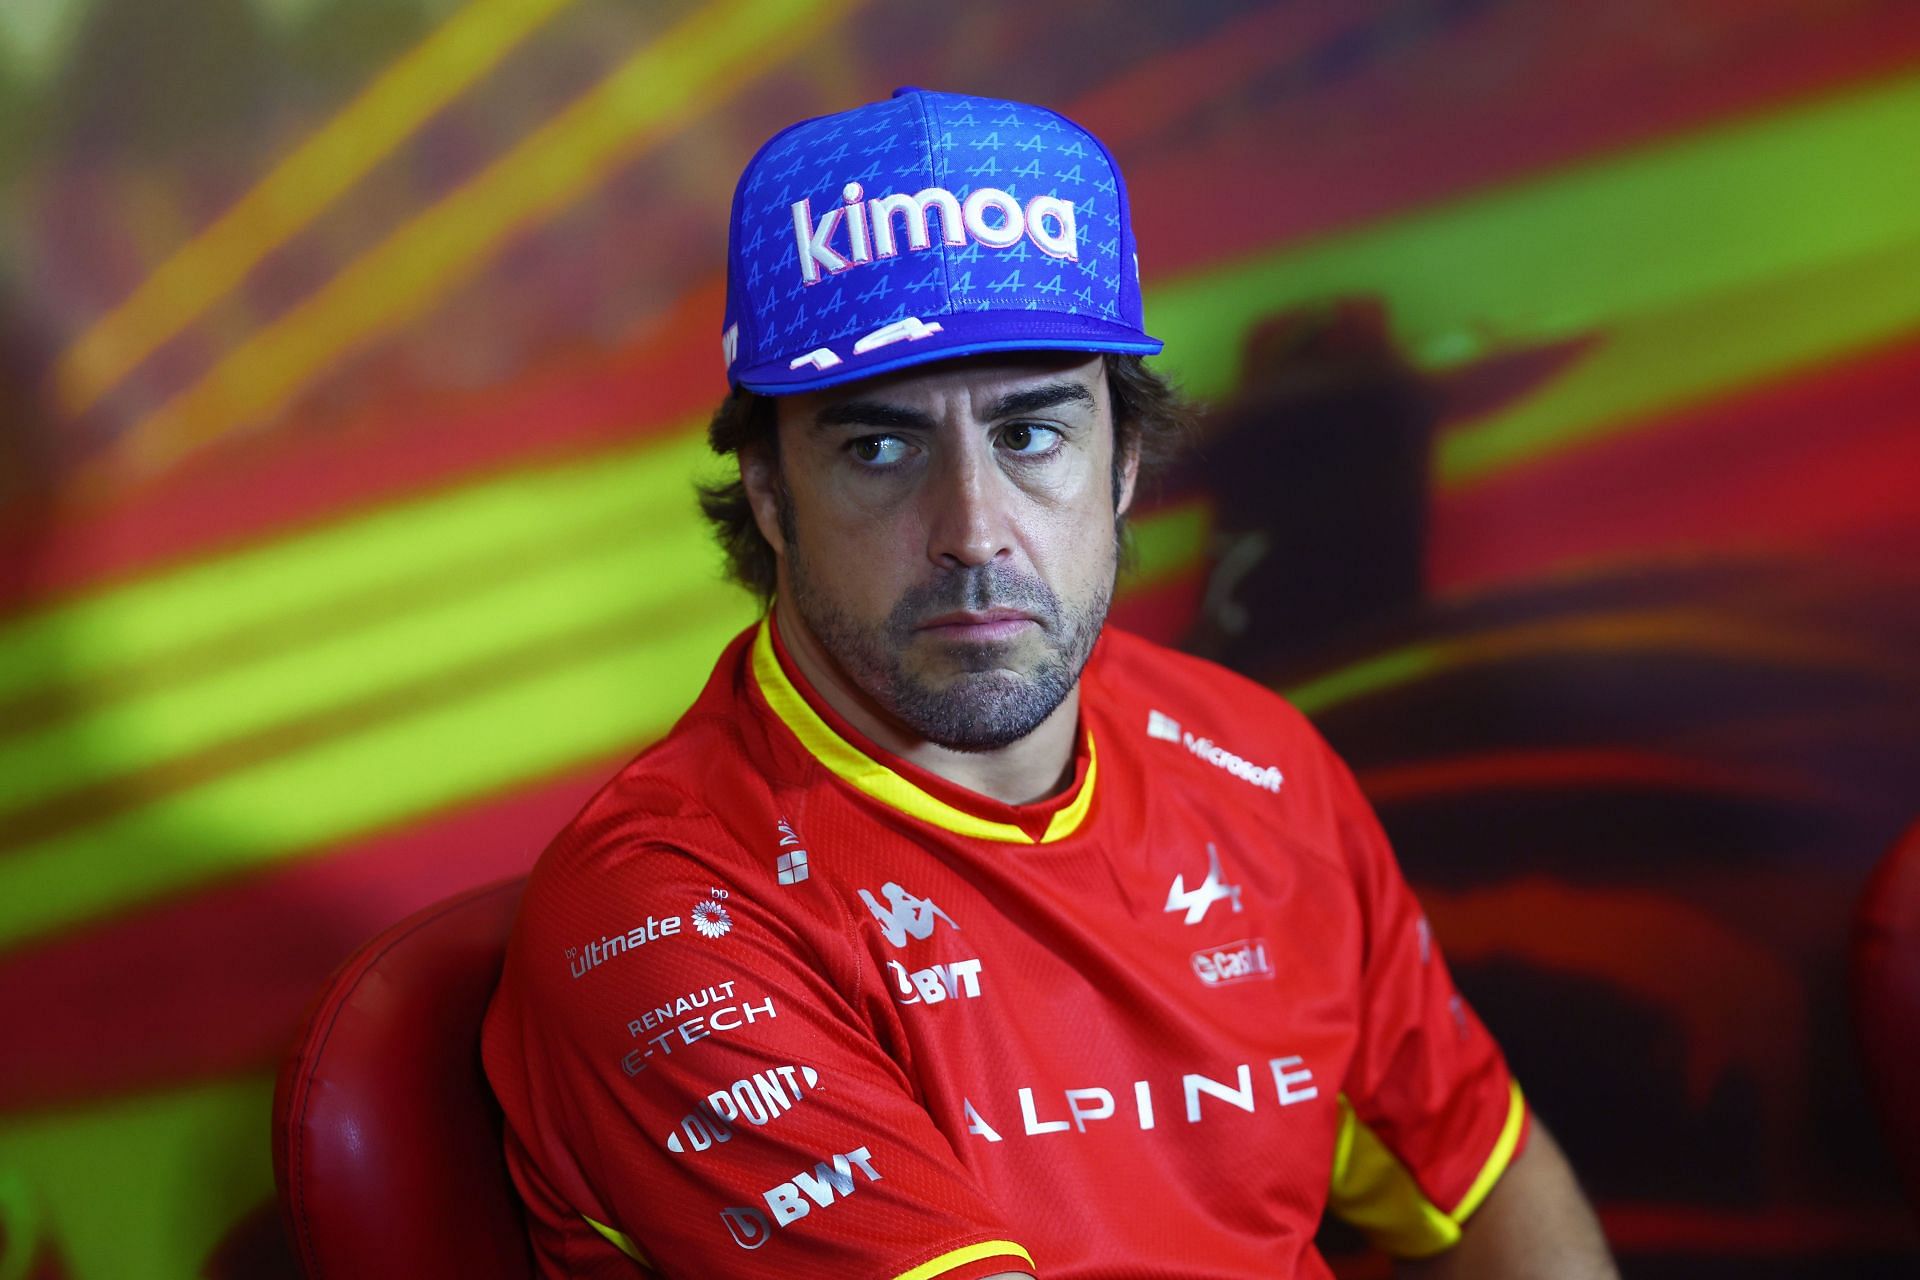 Fernando Alonso at the F1 Grand Prix of Spain - Practice